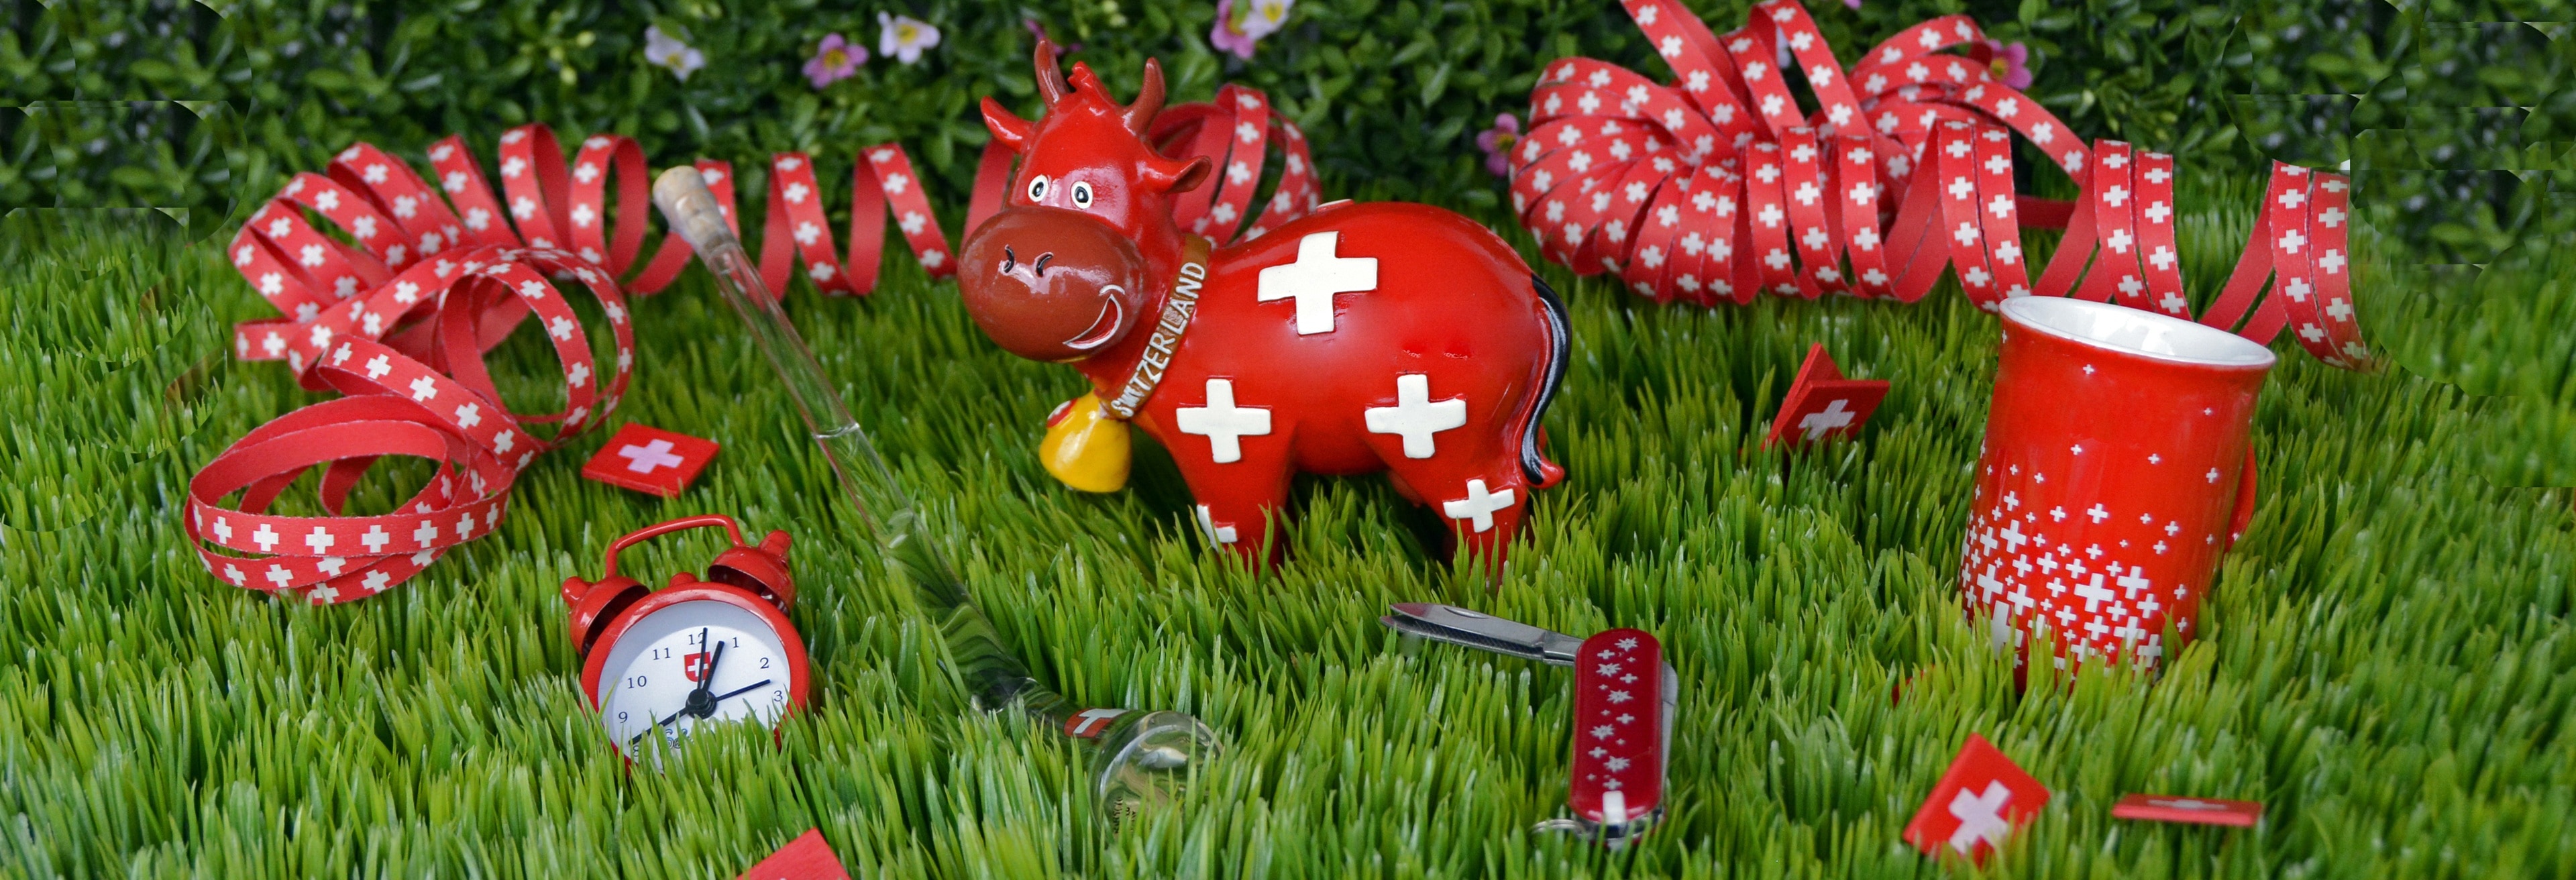 red cow figure